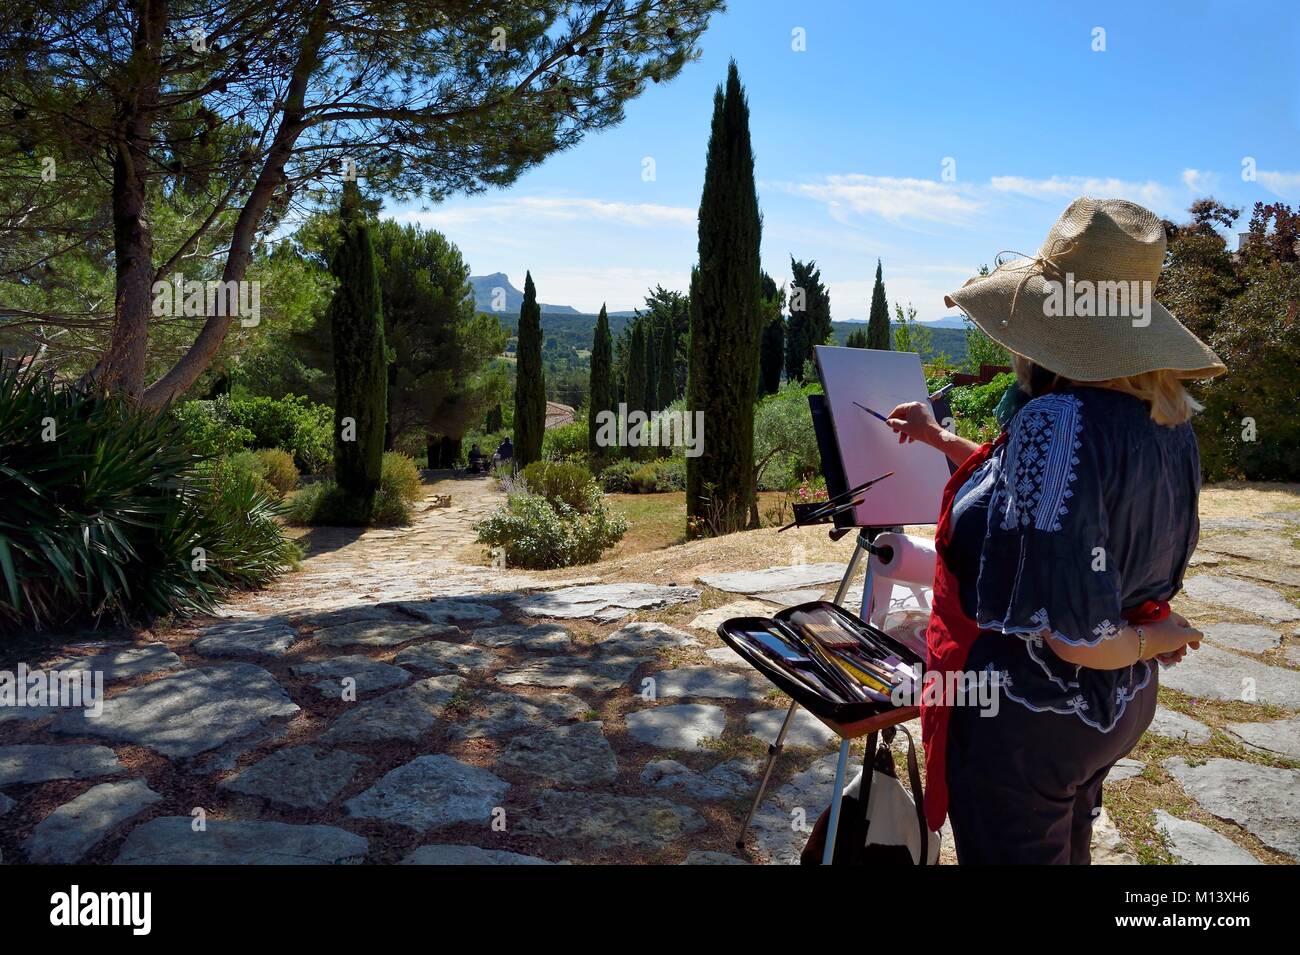 France, Bouches du Rhone, Aix en Provence, artist painter at the Painters' Field, the most famous paintings by Paul Cézanne have been painted from this panorama on the Sainte-Victoire mountain, located on the Marguerite Road on the Lauves hill Stock Photo